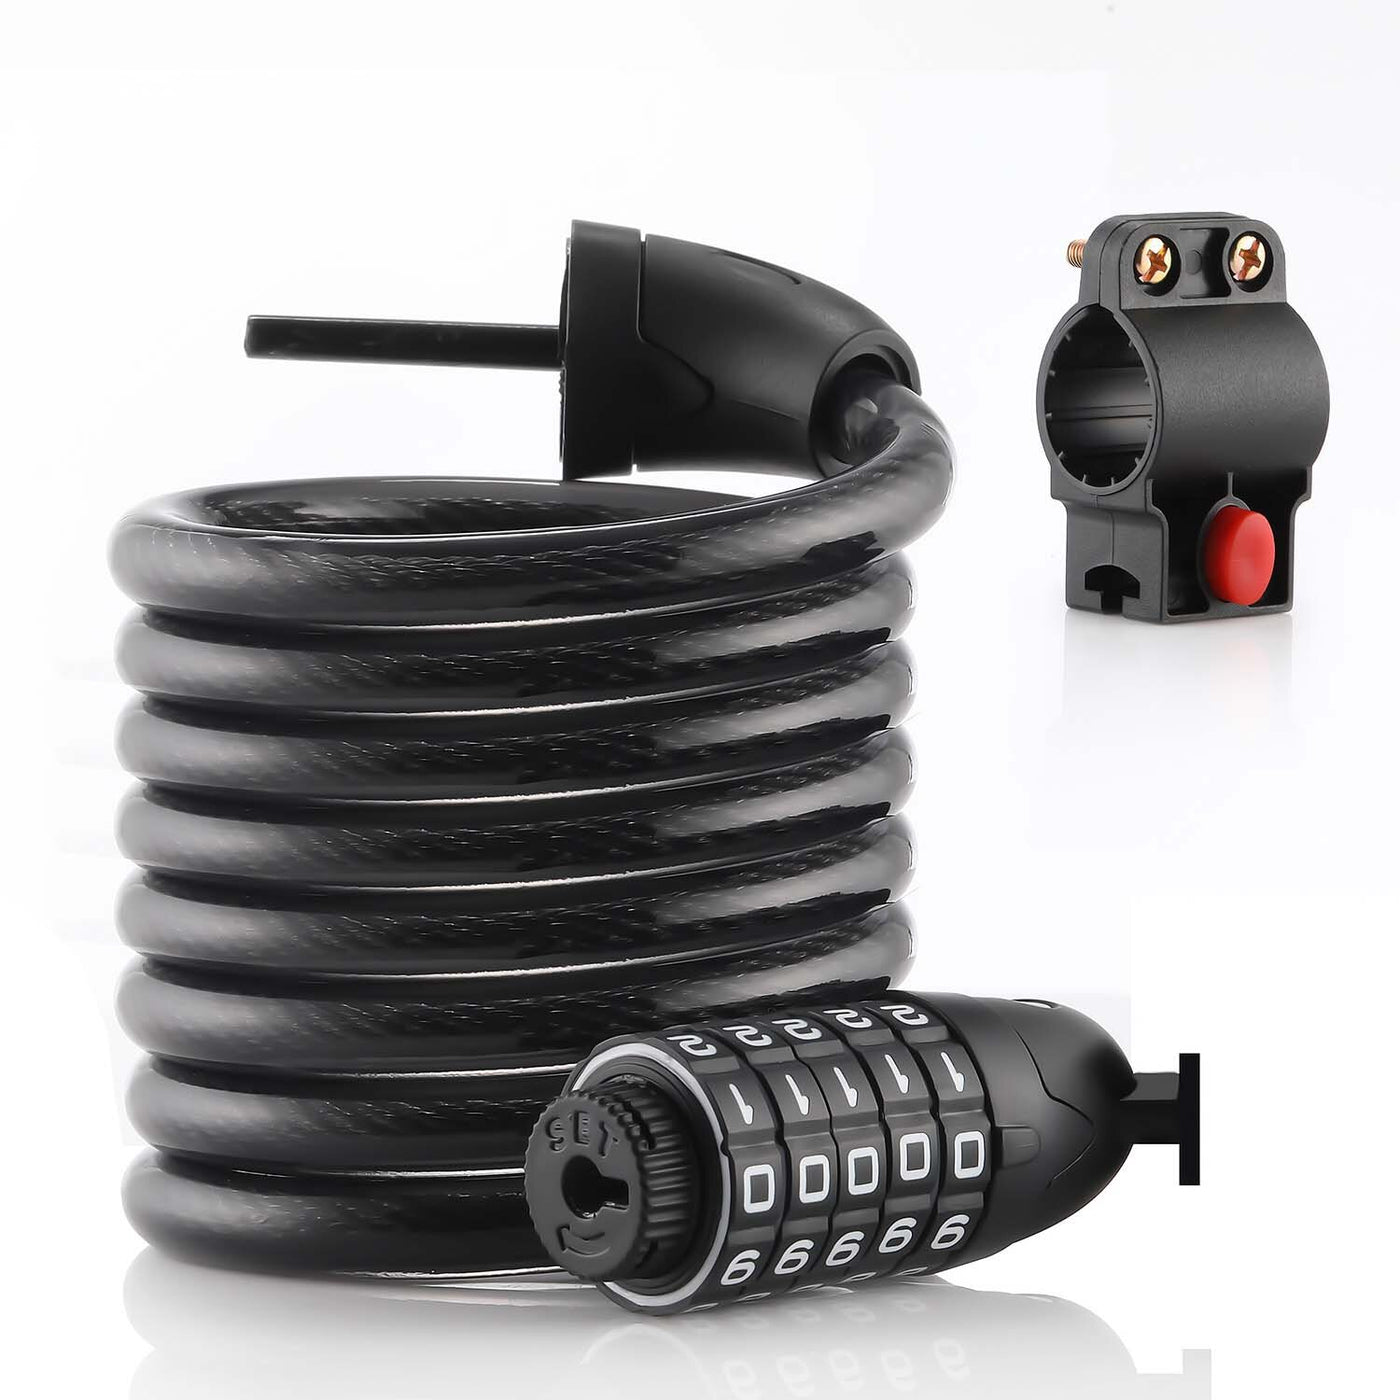 Circooter Cable Lock for Electric scooters or Bicycles